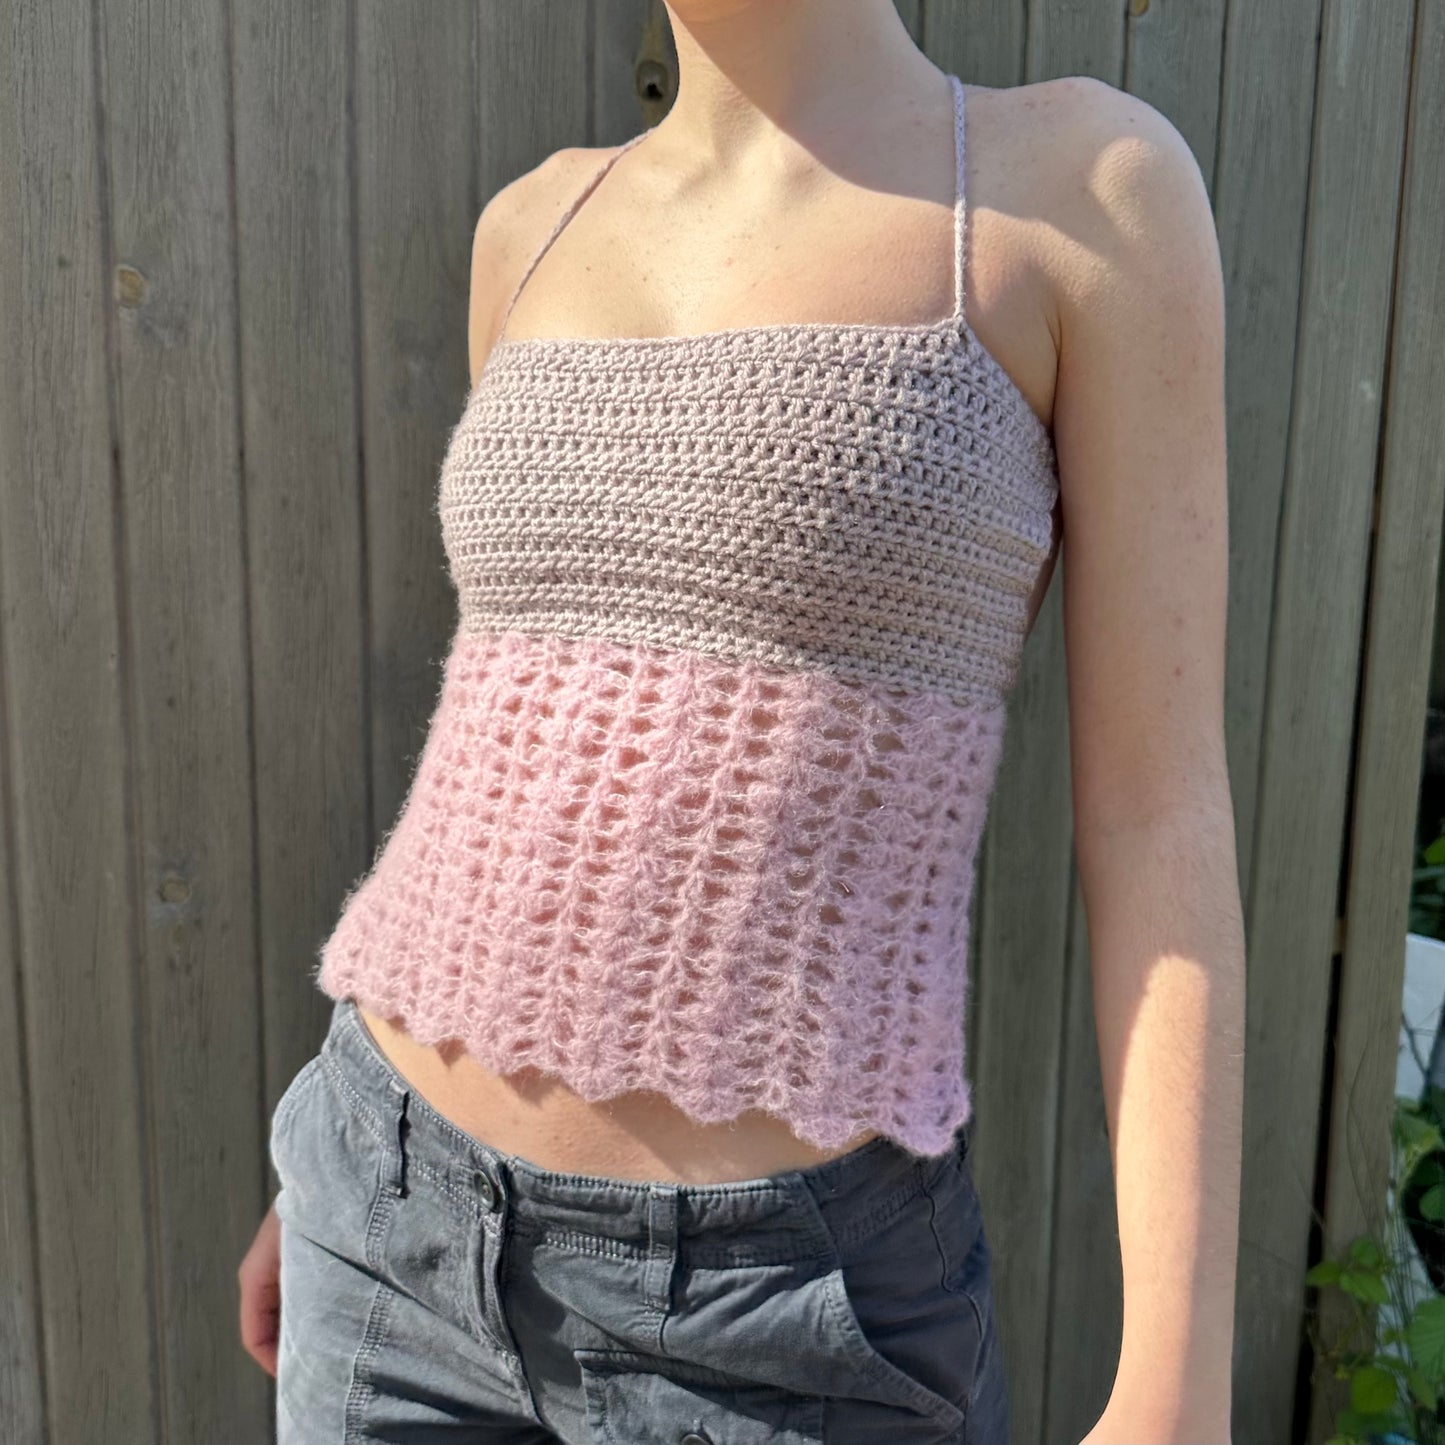 Handmade crochet mohair lace cami top in pink